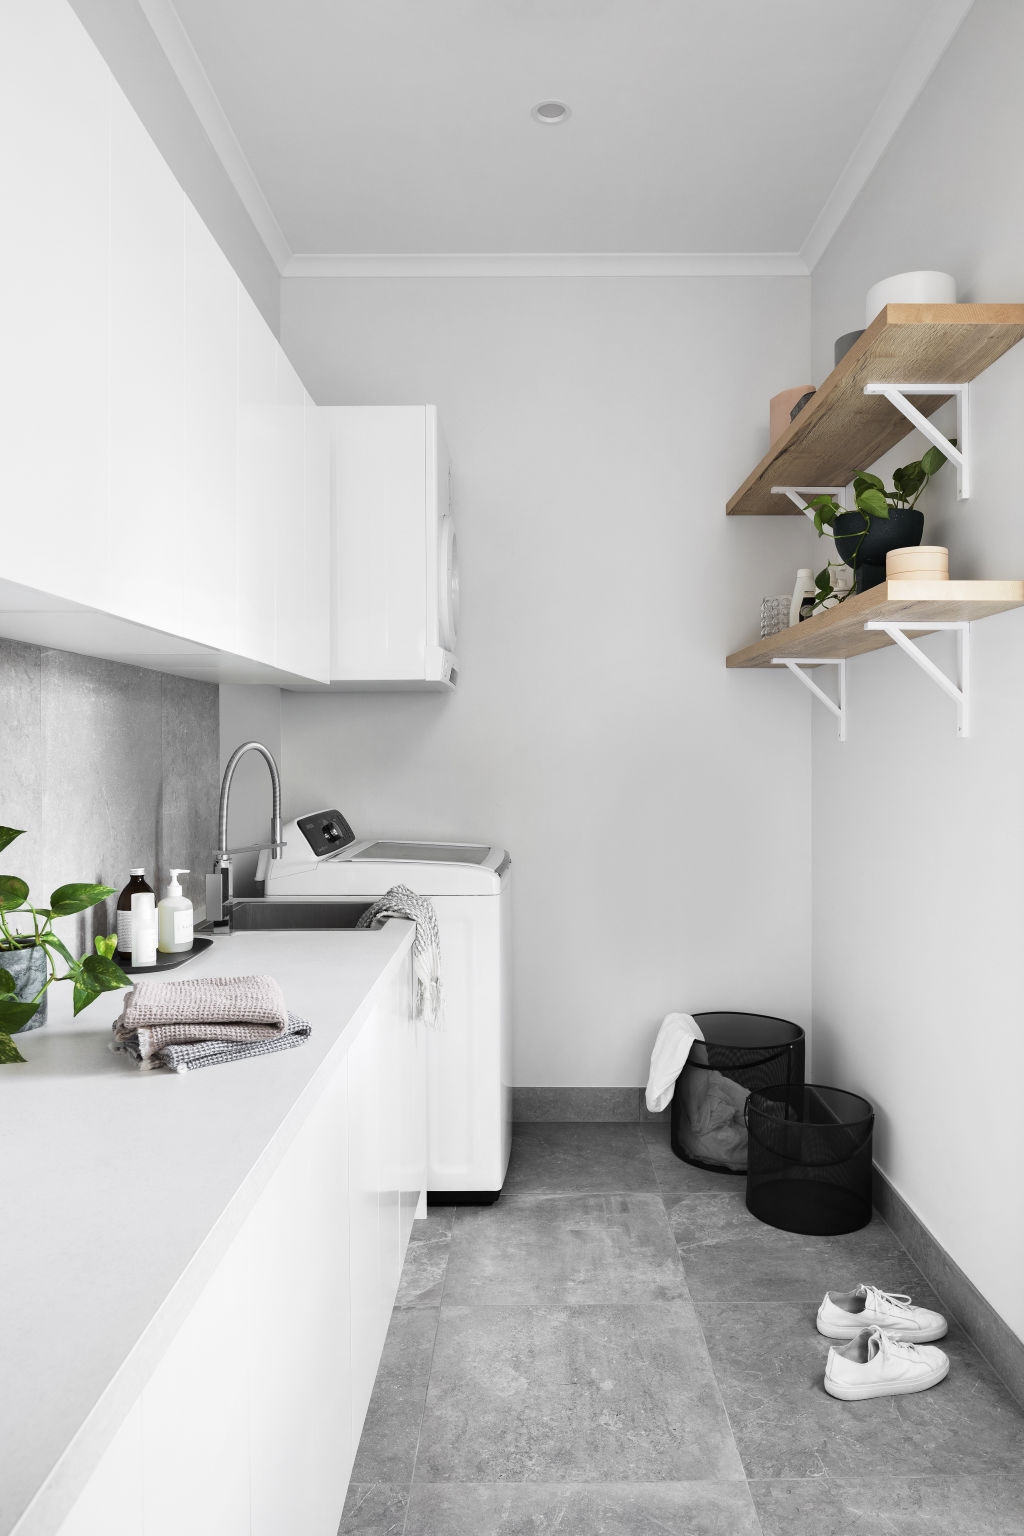 According to Cooper, you can also contain costs by focusing on the fitout rather than splashing out on new appliances. Photo: Kaboodle Kitchen